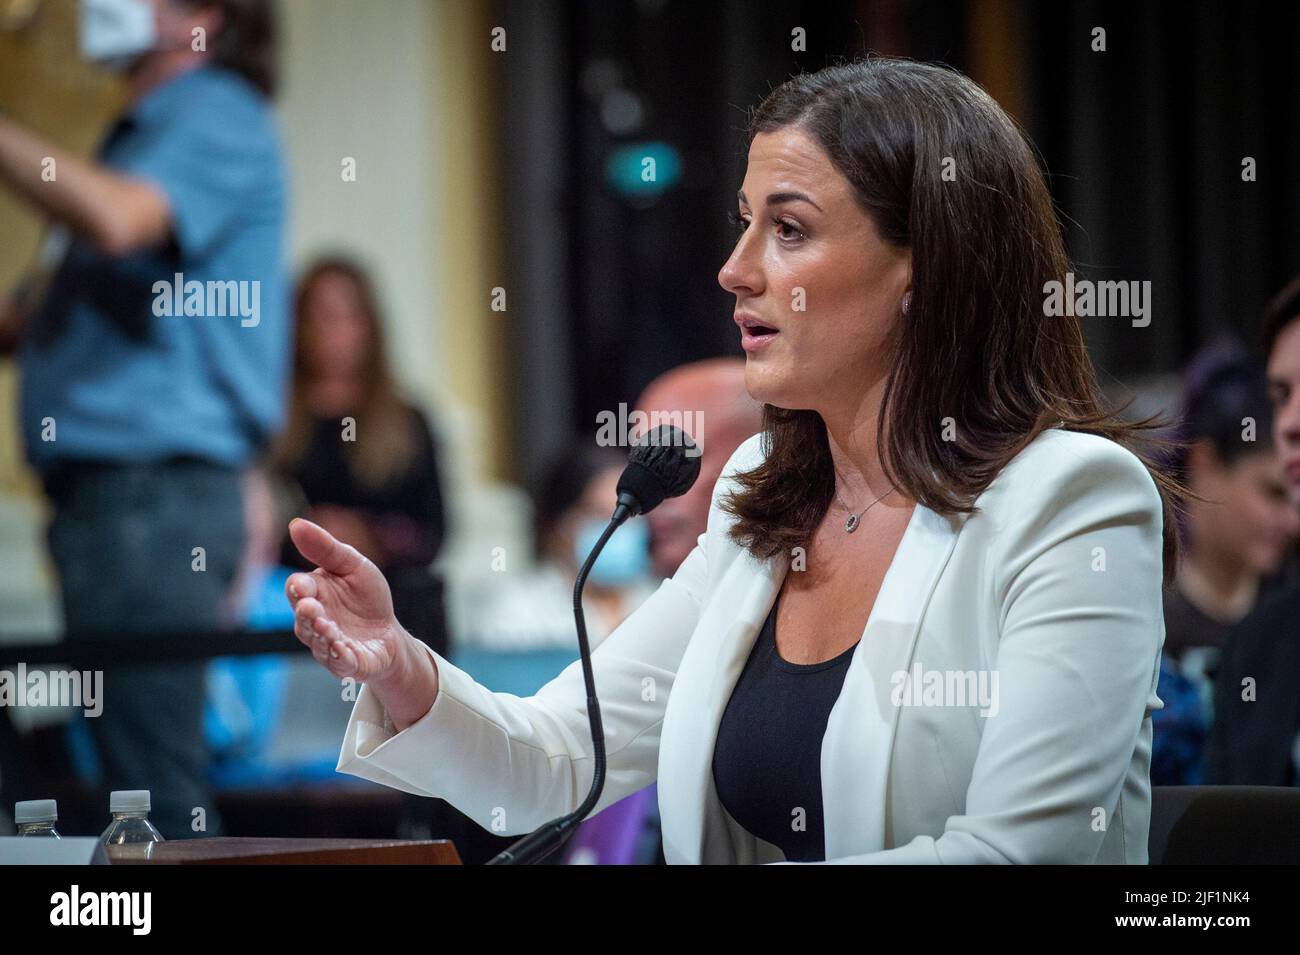 Washington, United States Of America. 28th June, 2022. Cassidy Hutchinson, an aide to former White House Chief of Staff Mark Meadows, responds to questions on day six of the United States House Select Committee to Investigate the January 6th Attack on the US Capitol hearing on Capitol Hill in Washington, DC on June 28, 2022. Credit: Rod Lamkey/CNP/Sipa USA Credit: Sipa USA/Alamy Live News Stock Photo